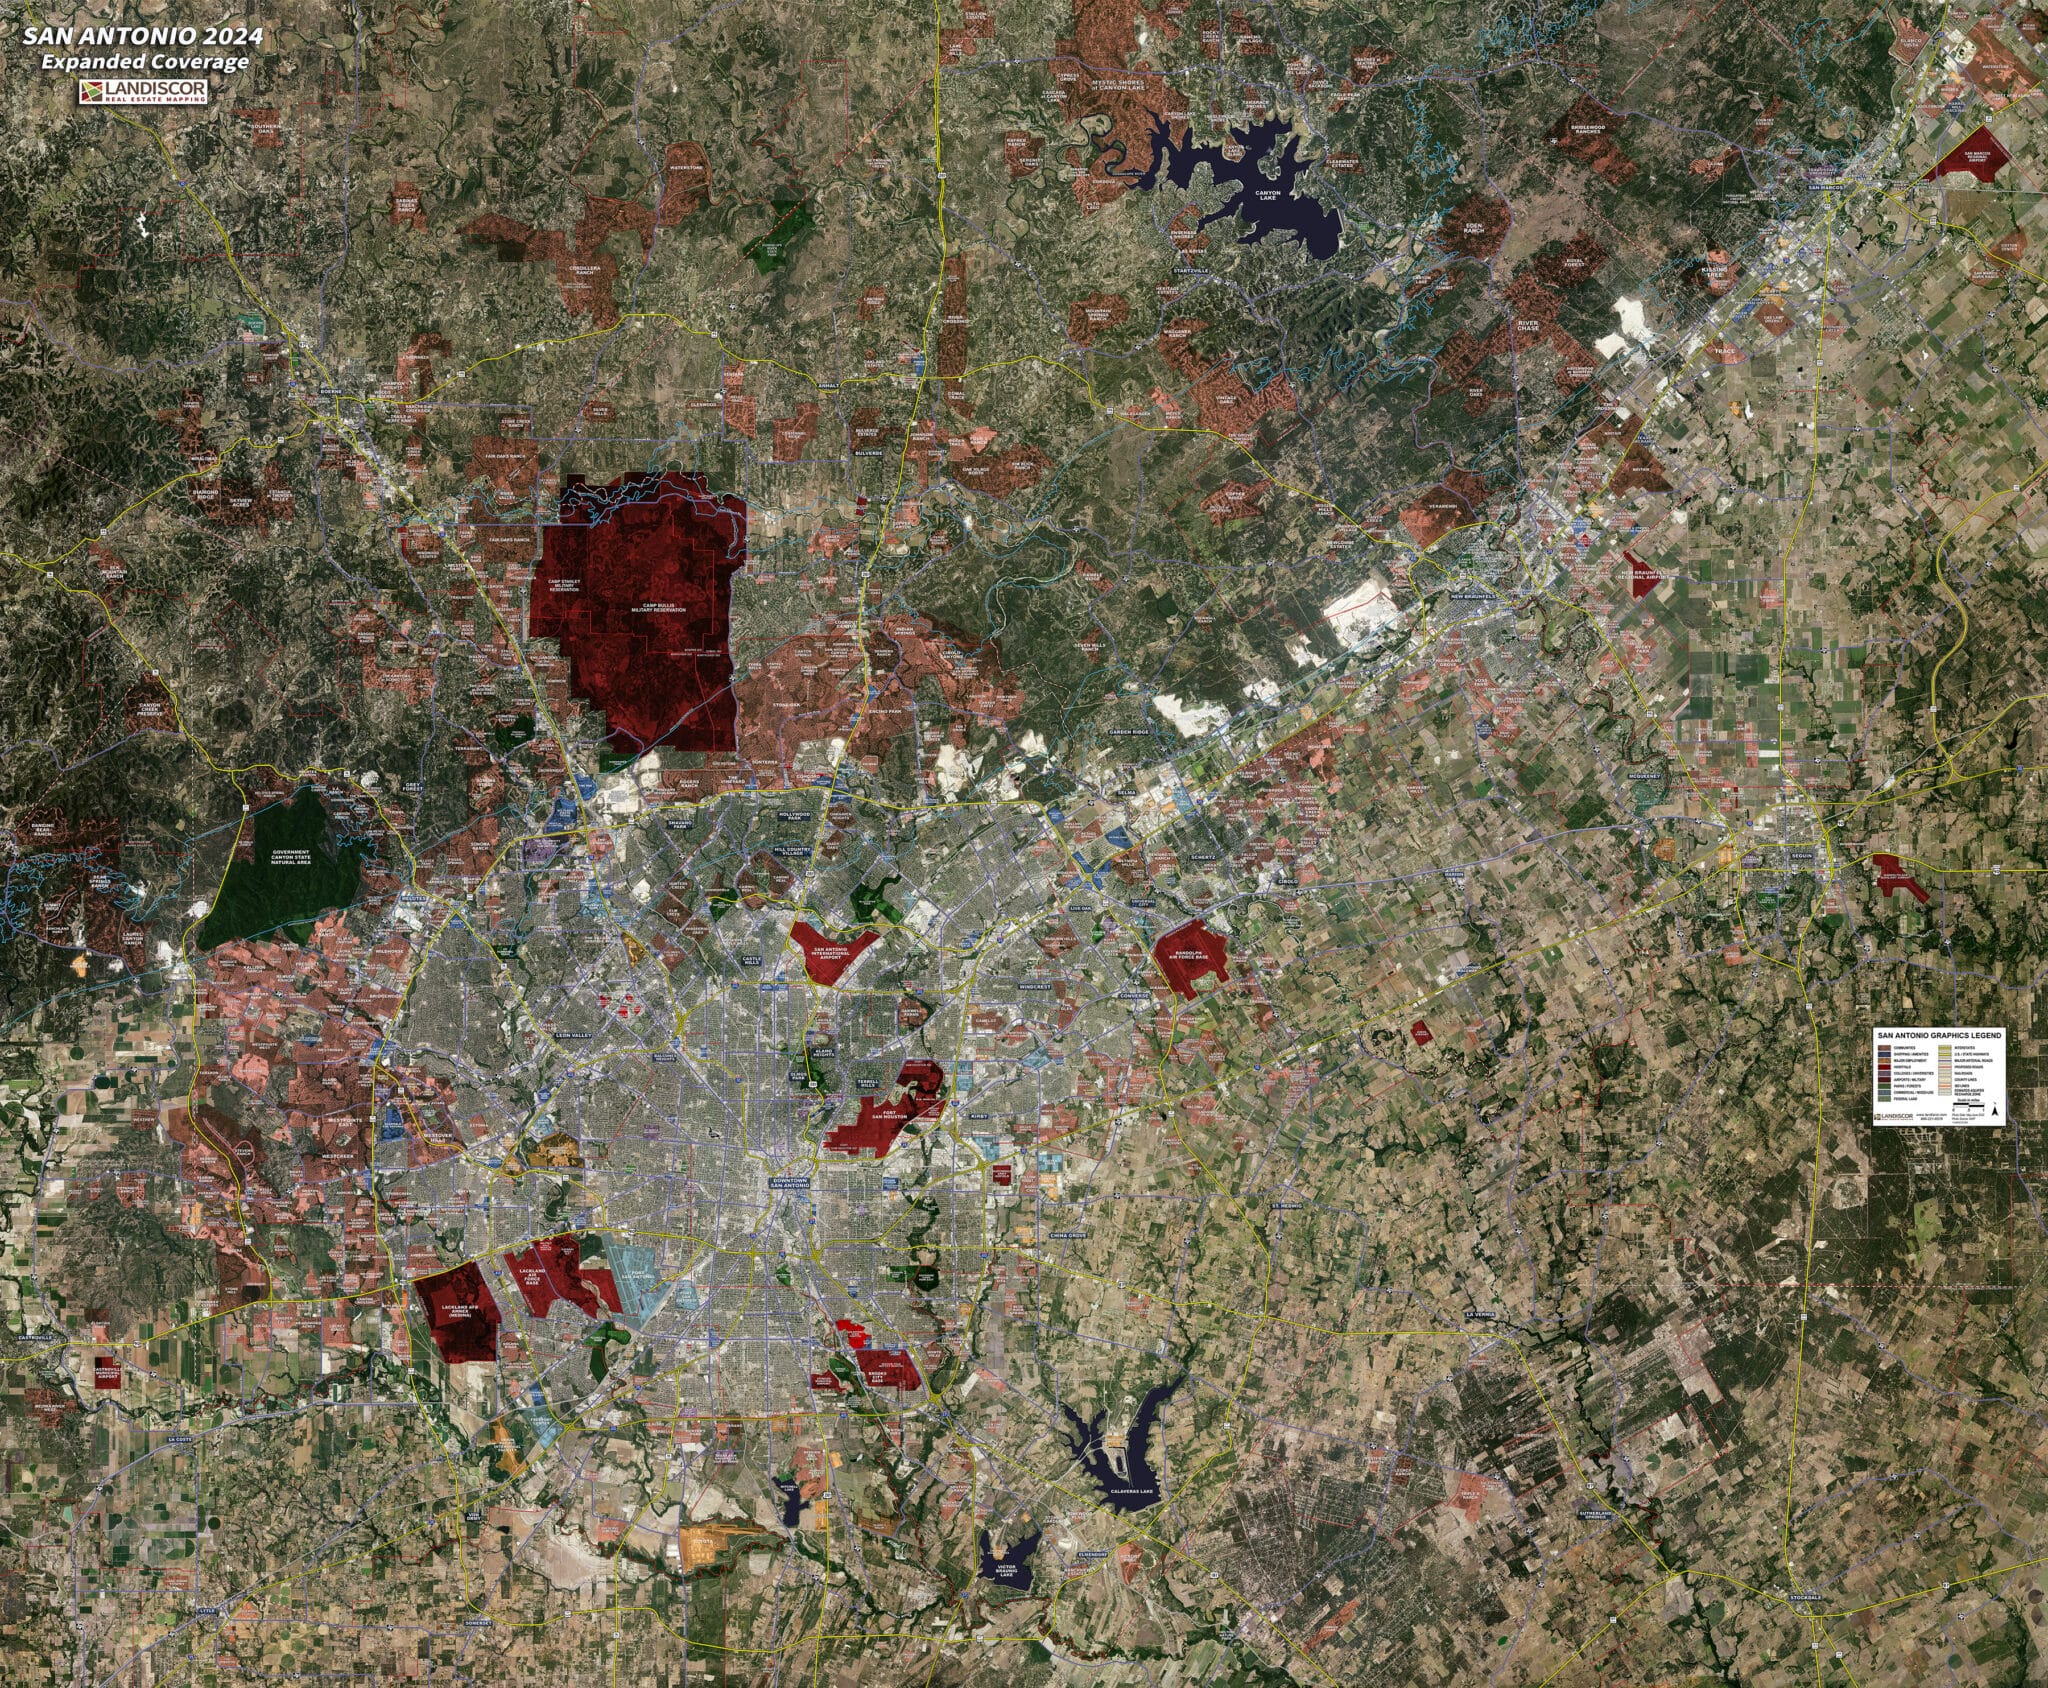 Rolled Aerial Map - San Antonio Expanded